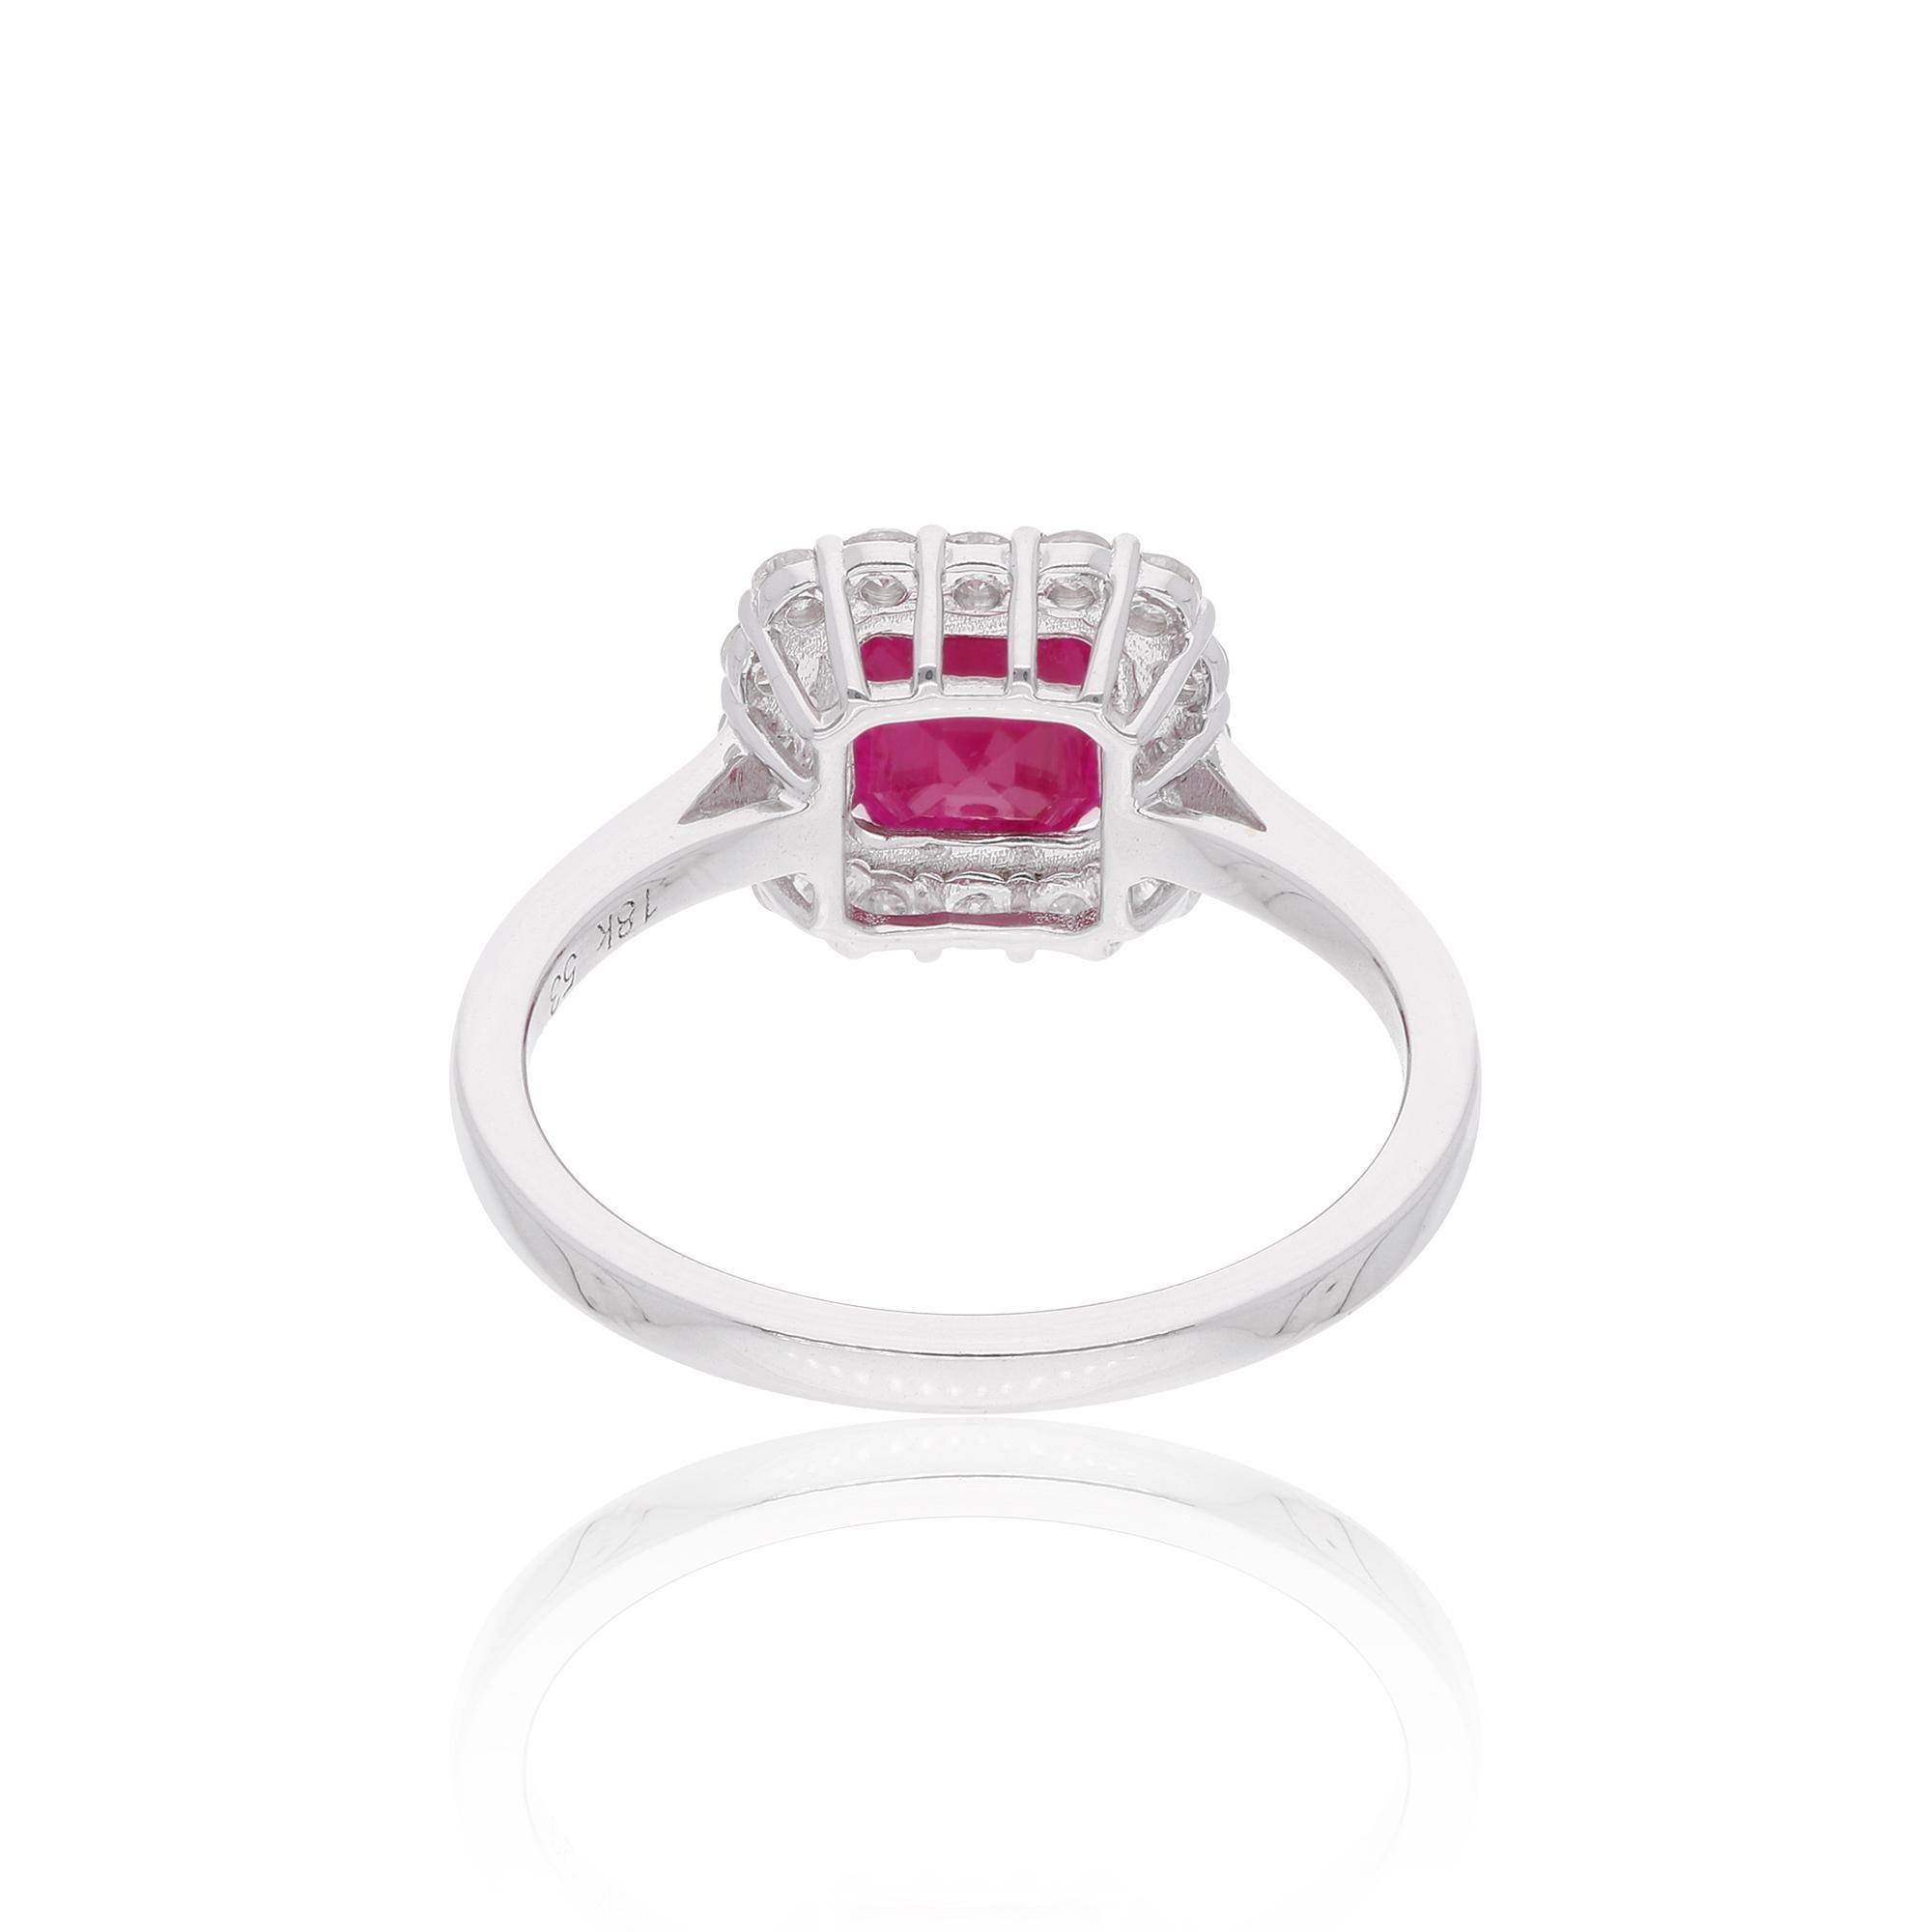 Item Code :- SER-23165
Gross Wt. :- 3.48 gm
18k Solid White Gold Wt. :- 3.03 gm
Natural Diamond Wt. :- 0.35 Ct. 
Ruby Wt. :- 1.88 Ct.
Ring Size :- 7 US & All size available

✦ Sizing
.....................
We can adjust most items to fit your sizing